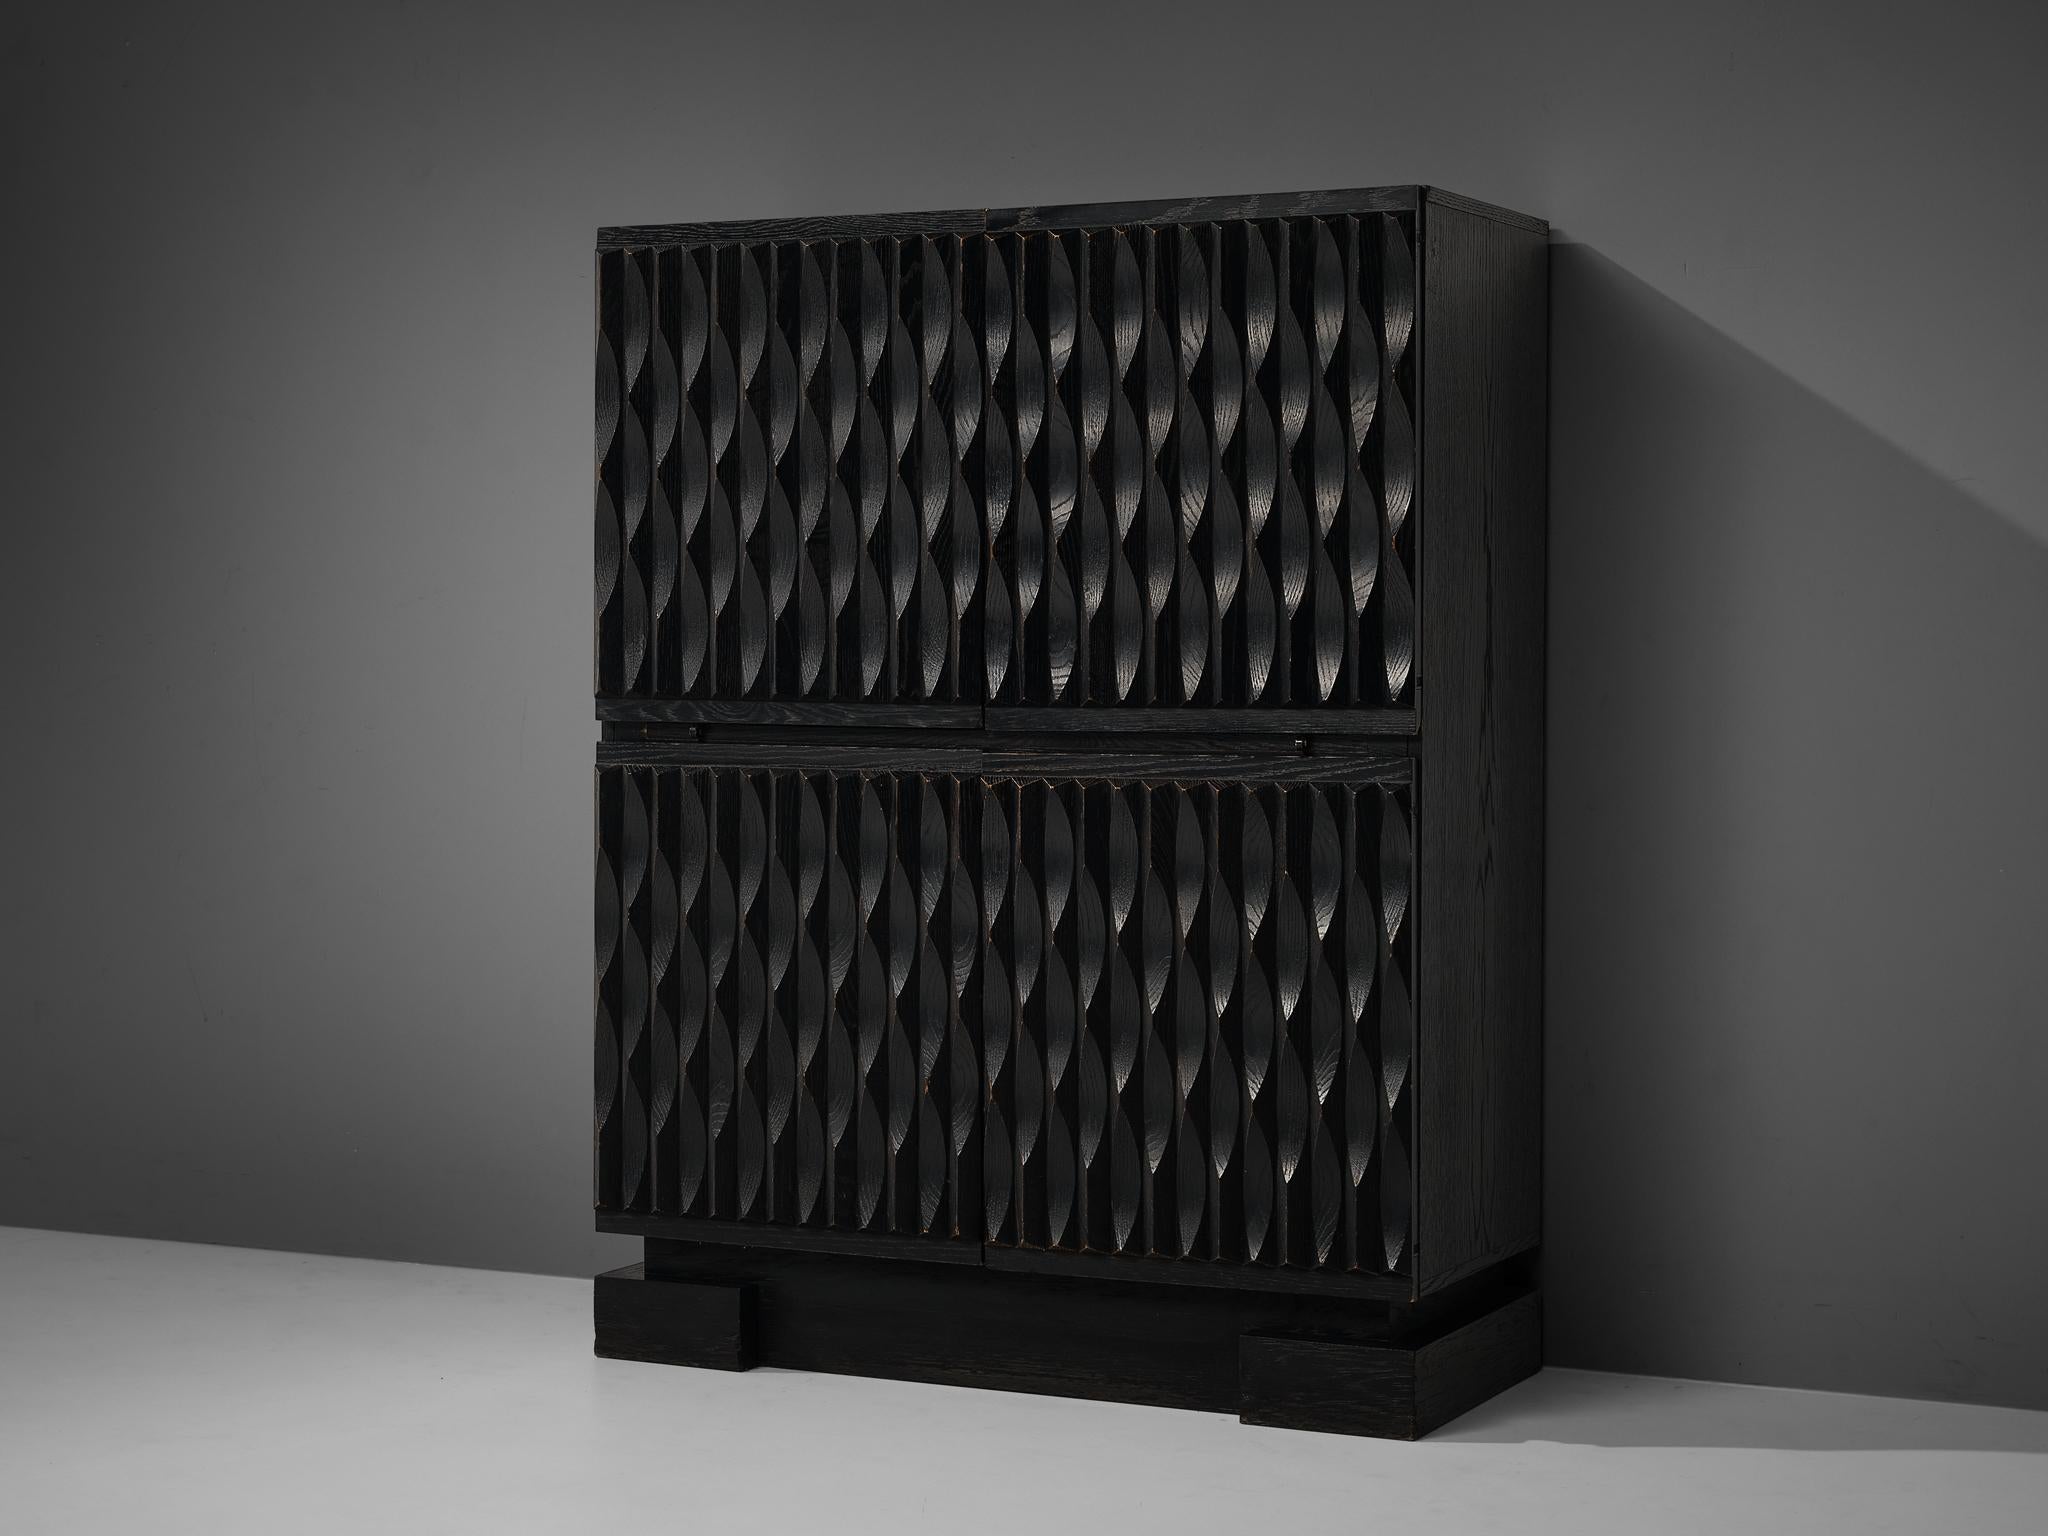 De Coene, bar cabinet in black darkened oak, Belgium, 1970s.

This small bar cabinet with geometric doors are executed by De Coene. The cabinet shows an intriguing graphic pattern on its doors. The bar cabinet features can be opened on with two